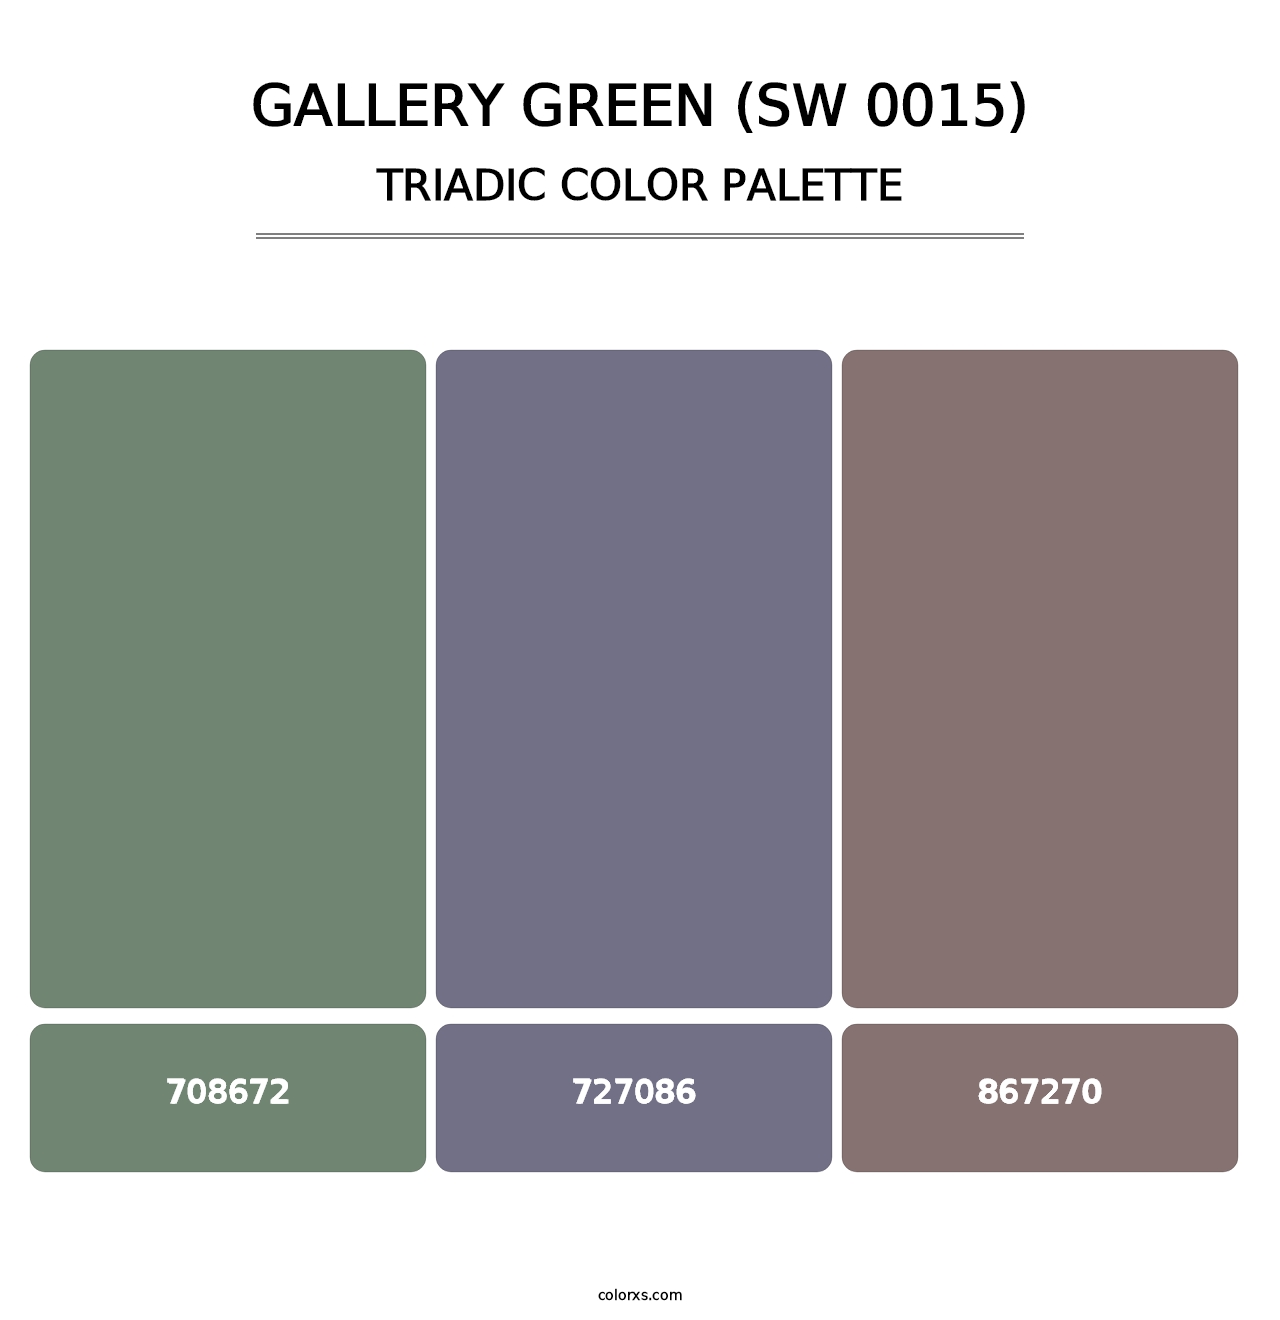 Gallery Green (SW 0015) - Triadic Color Palette